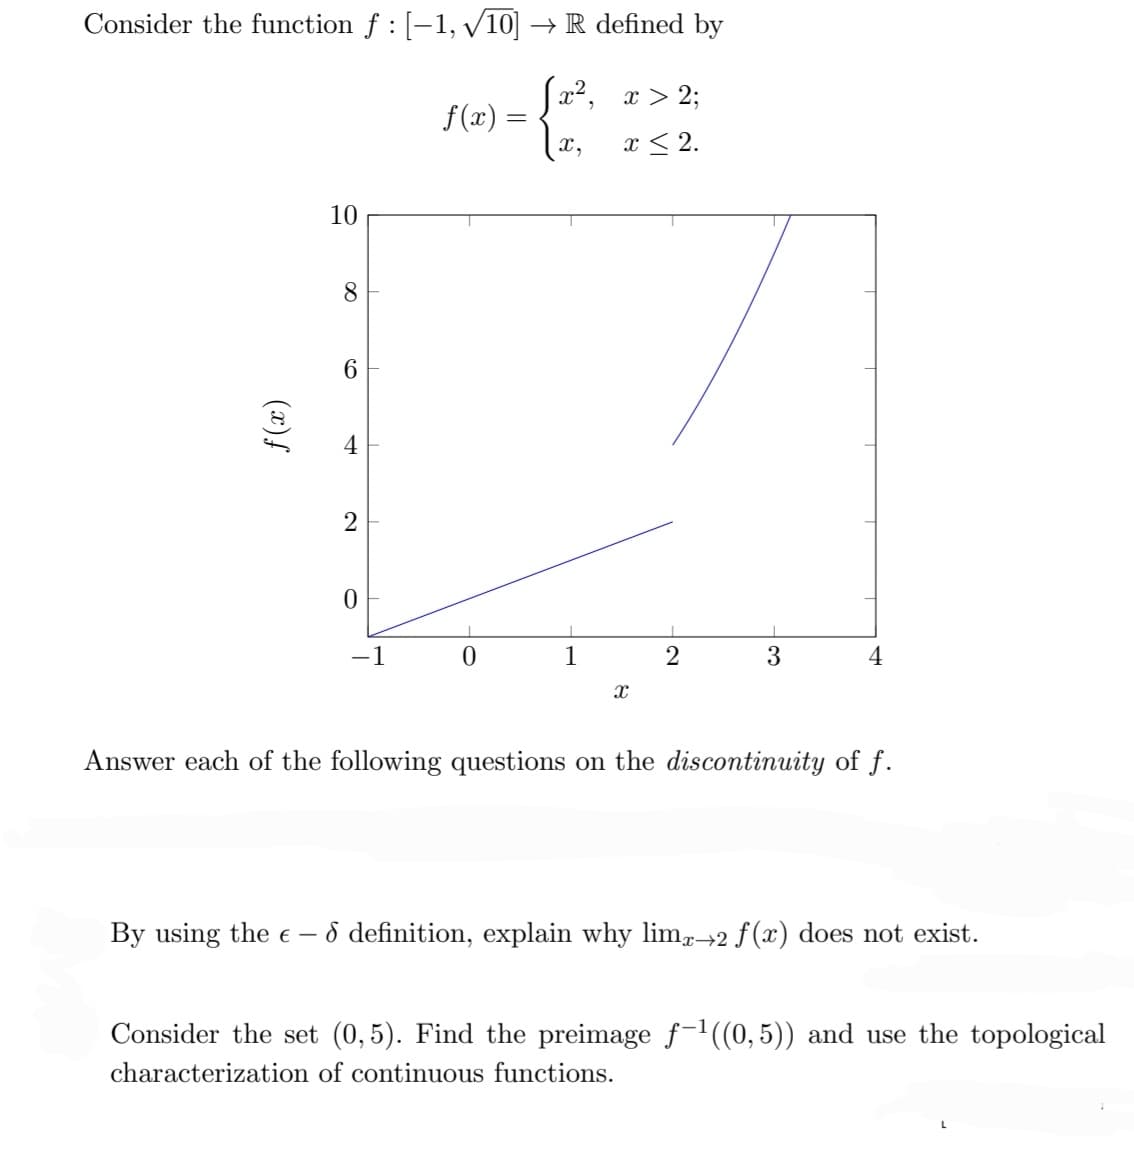 Consider the function ƒ : [−1, √/10] → R defined by
[x²,
x,
f(x)
10
8
6
4
2
0
-1
ƒ(x) =
0
1
1
x > 2;
x ≤ 2.
X
I
2
3
4
Answer each of the following questions on the discontinuity of f.
By using the € - 8 definition, explain why limx→2 f(x) does not exist.
Consider the set (0,5). Find the preimage f-¹((0,5)) and use the topological
characterization of continuous functions.